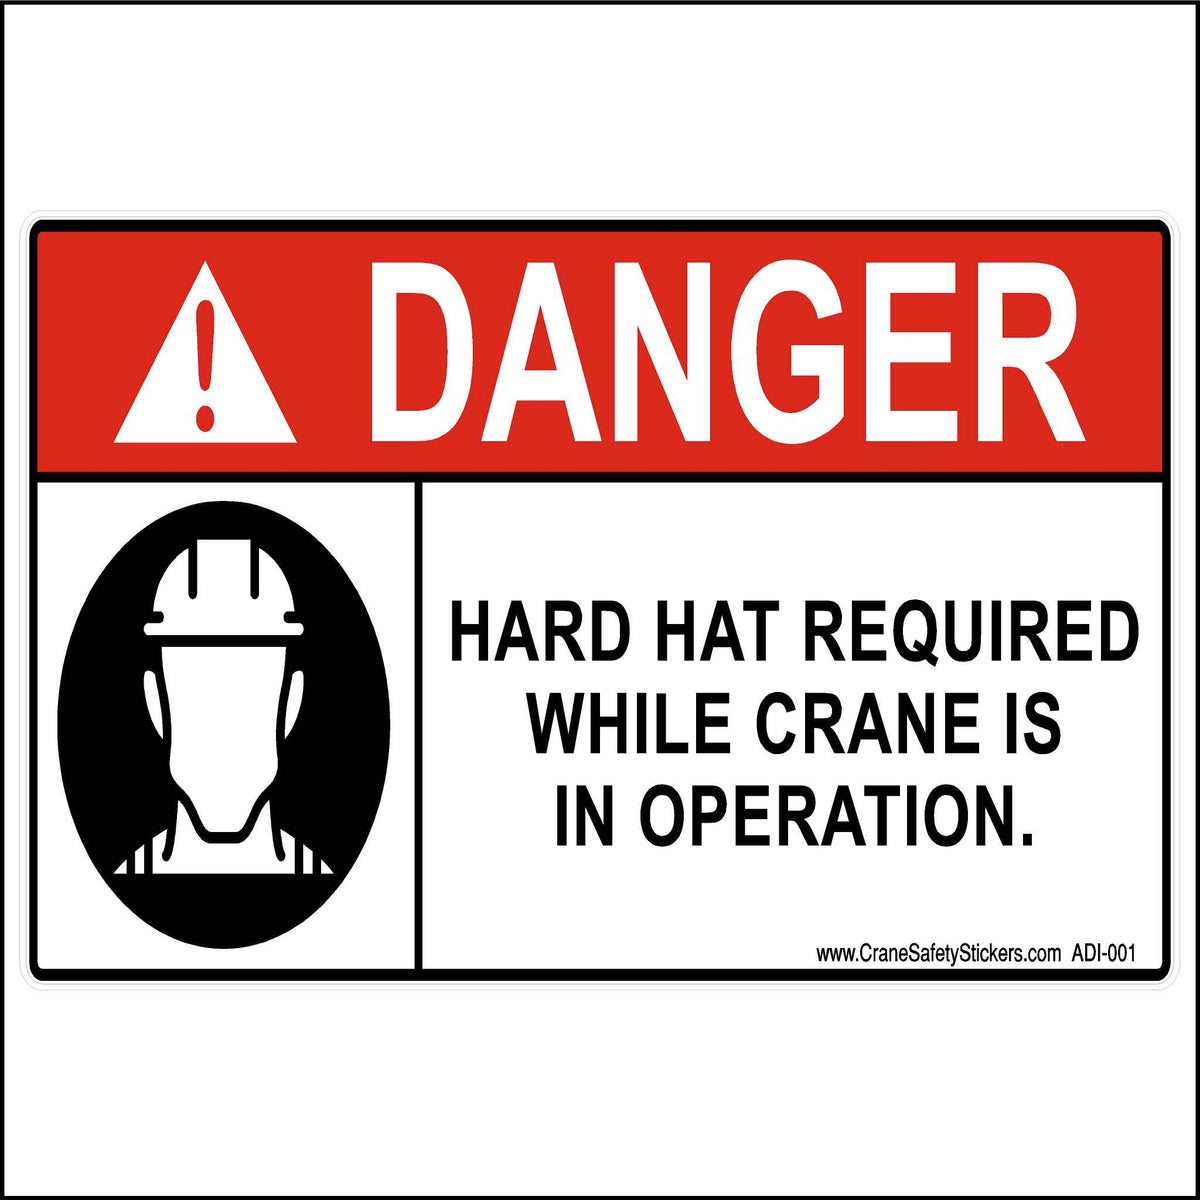 12 inch by 18 inch Safety Sign Printed With,Danger Hard Hat Required When Crane Is In Operation.